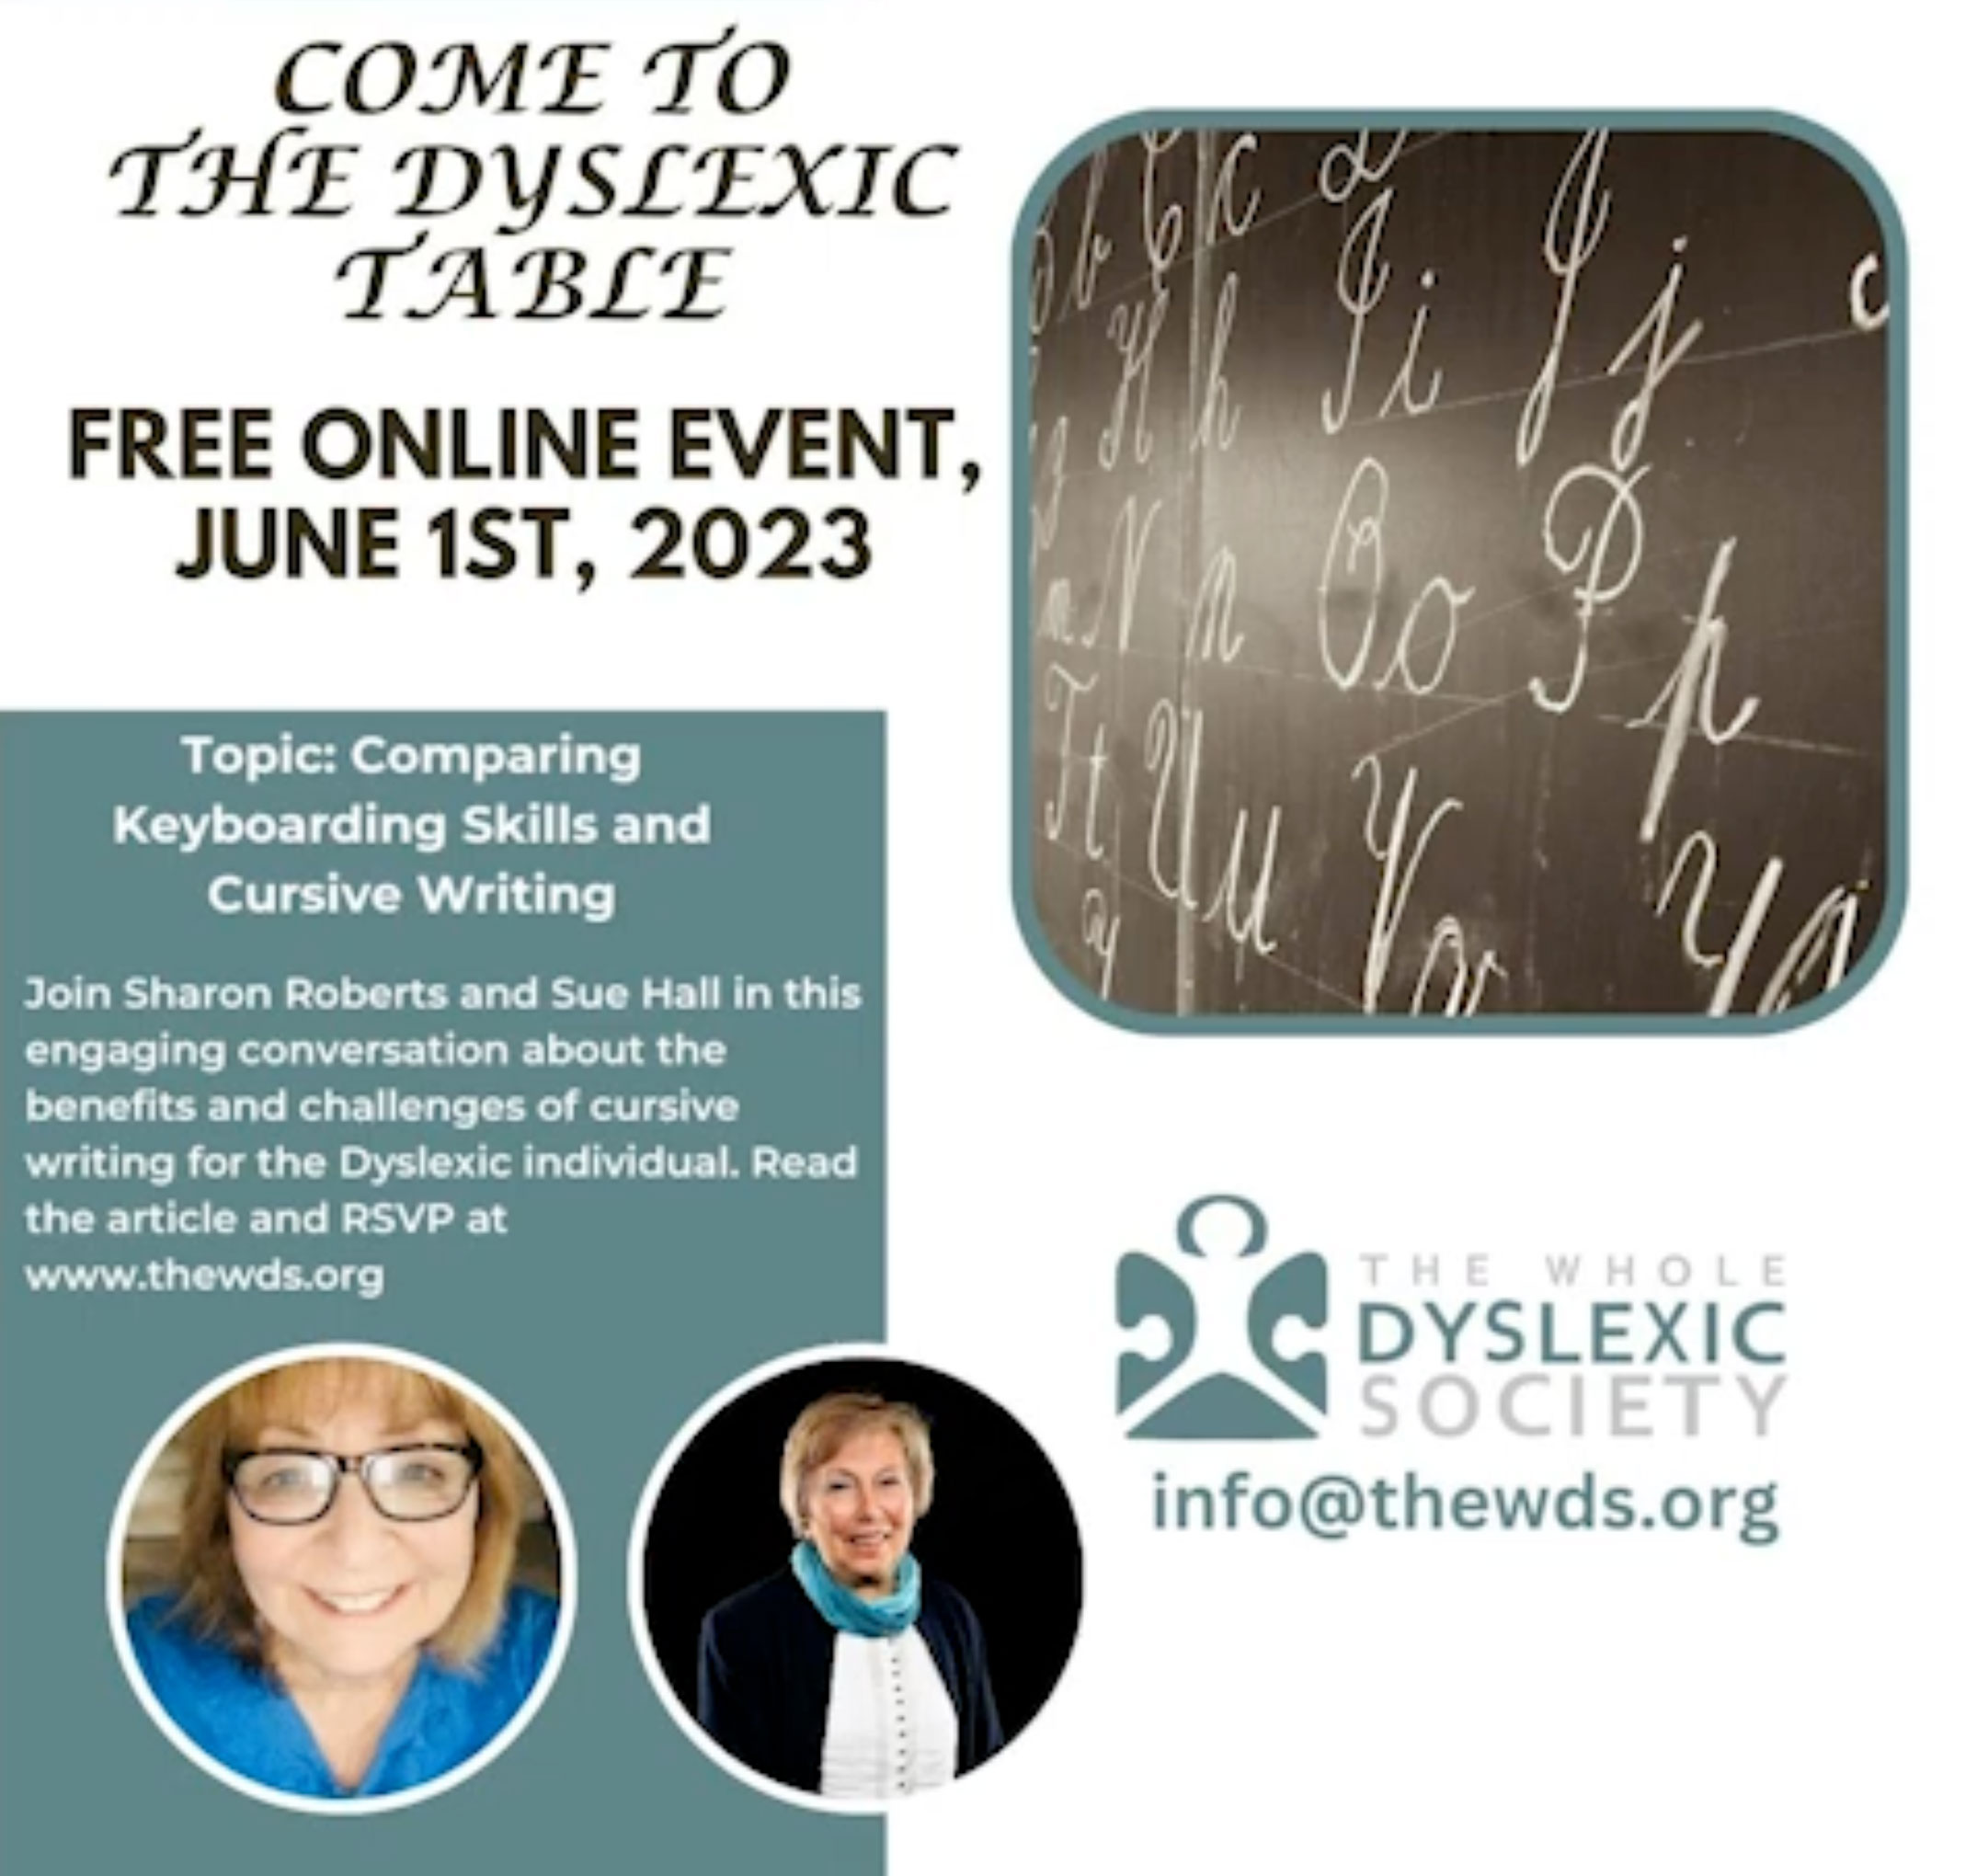 Come to The Dyslexic Table: Comparing Keyboarding Skills & Cursive Writing